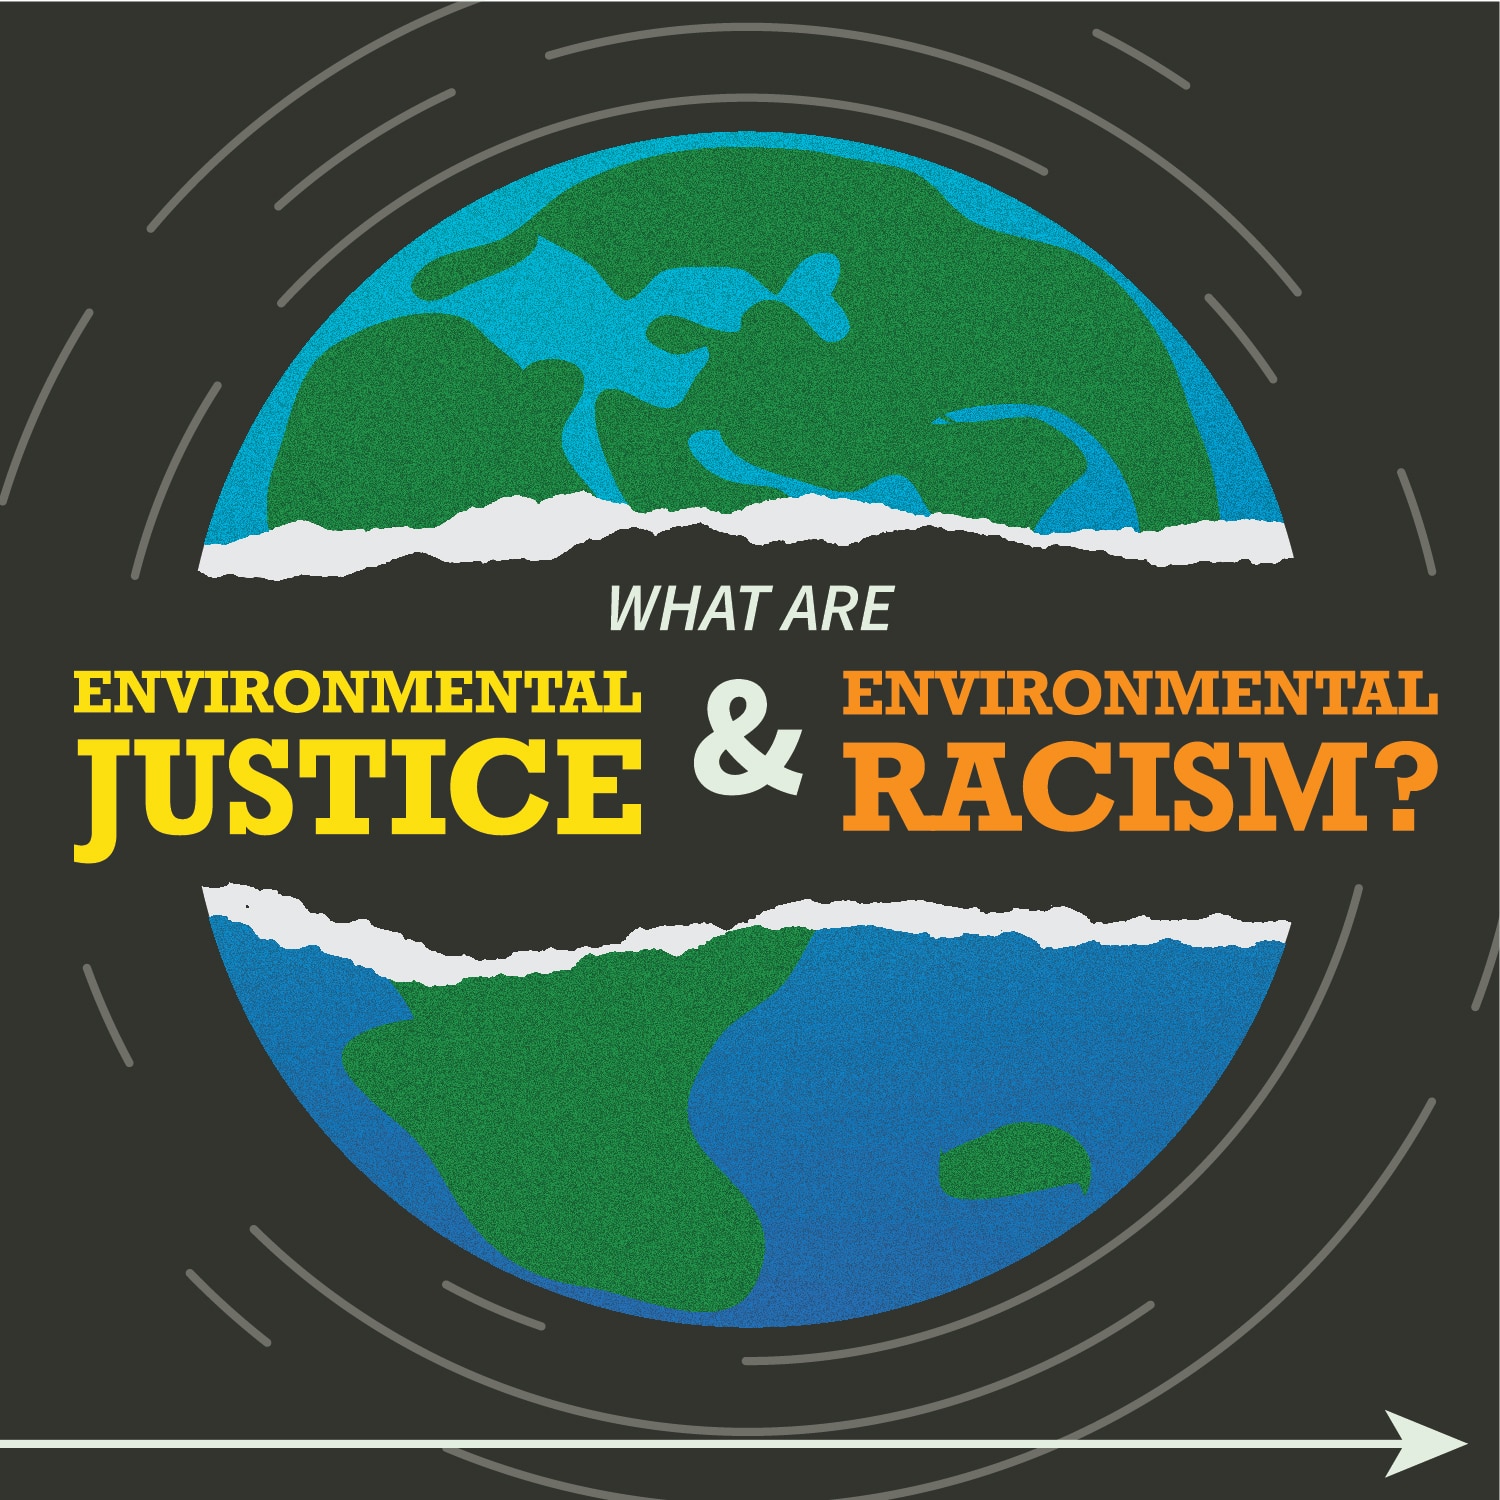 What are environmental justice and Environmental Racism Graphic